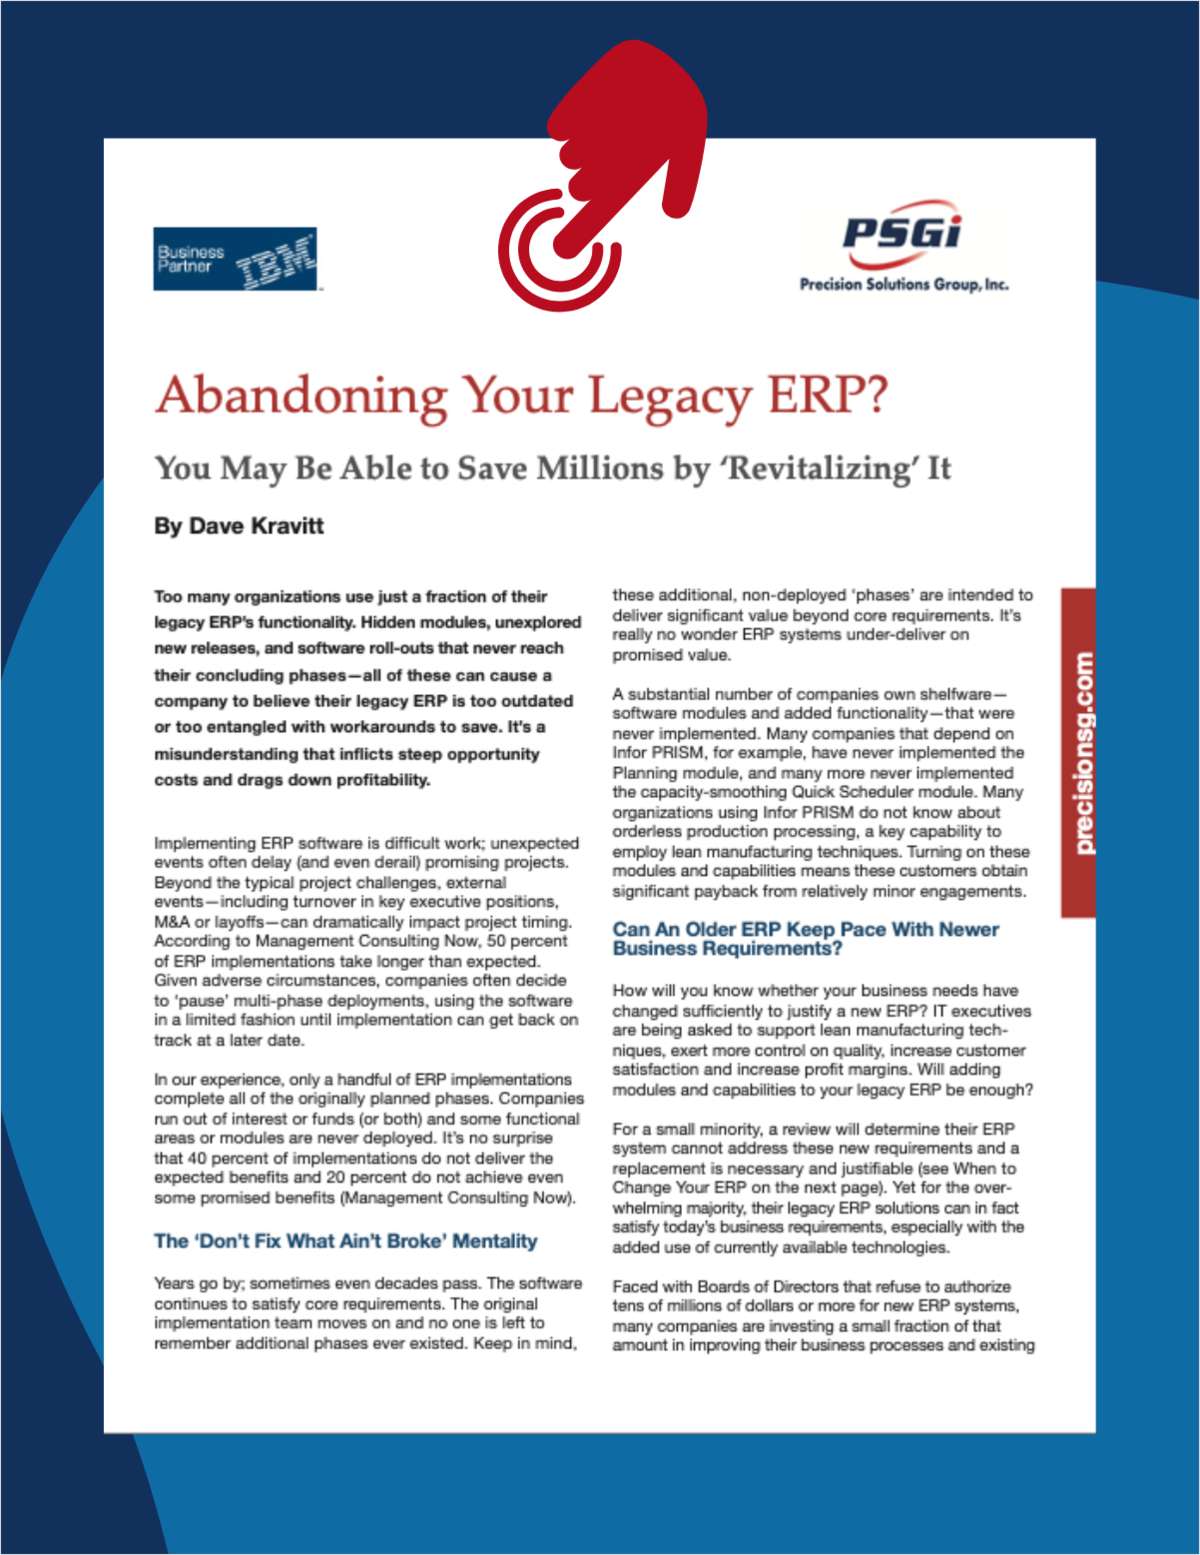 Abandoning Your Legacy ERP?